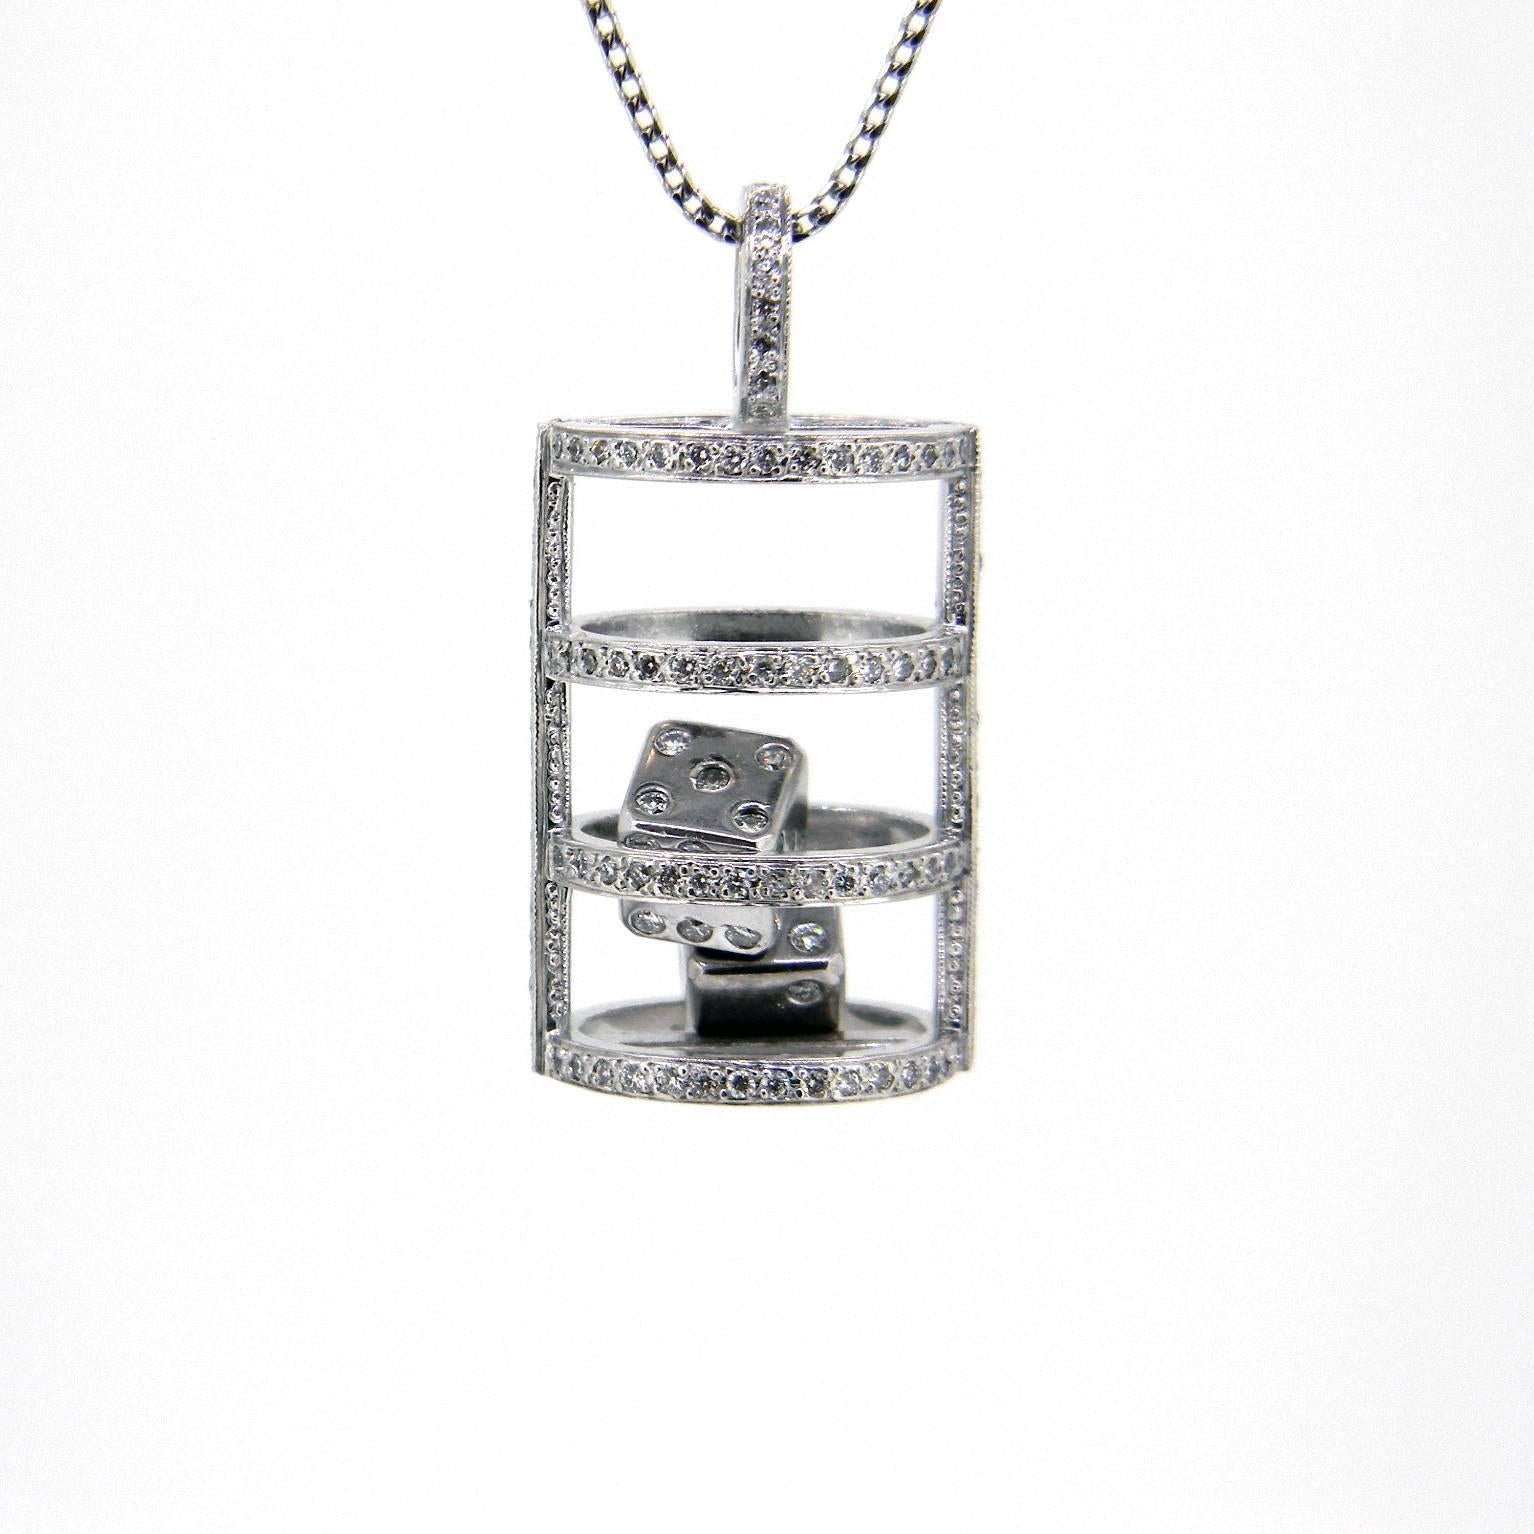 The thrill of the roll of a dice can go with you everyday with this beautiful 18ct white gold pendant designed and handmade by us here at Imp Jewellery, Melbourne. 

A diamond-set cage holds two diamond-set dice that roll around freely. 
The cage